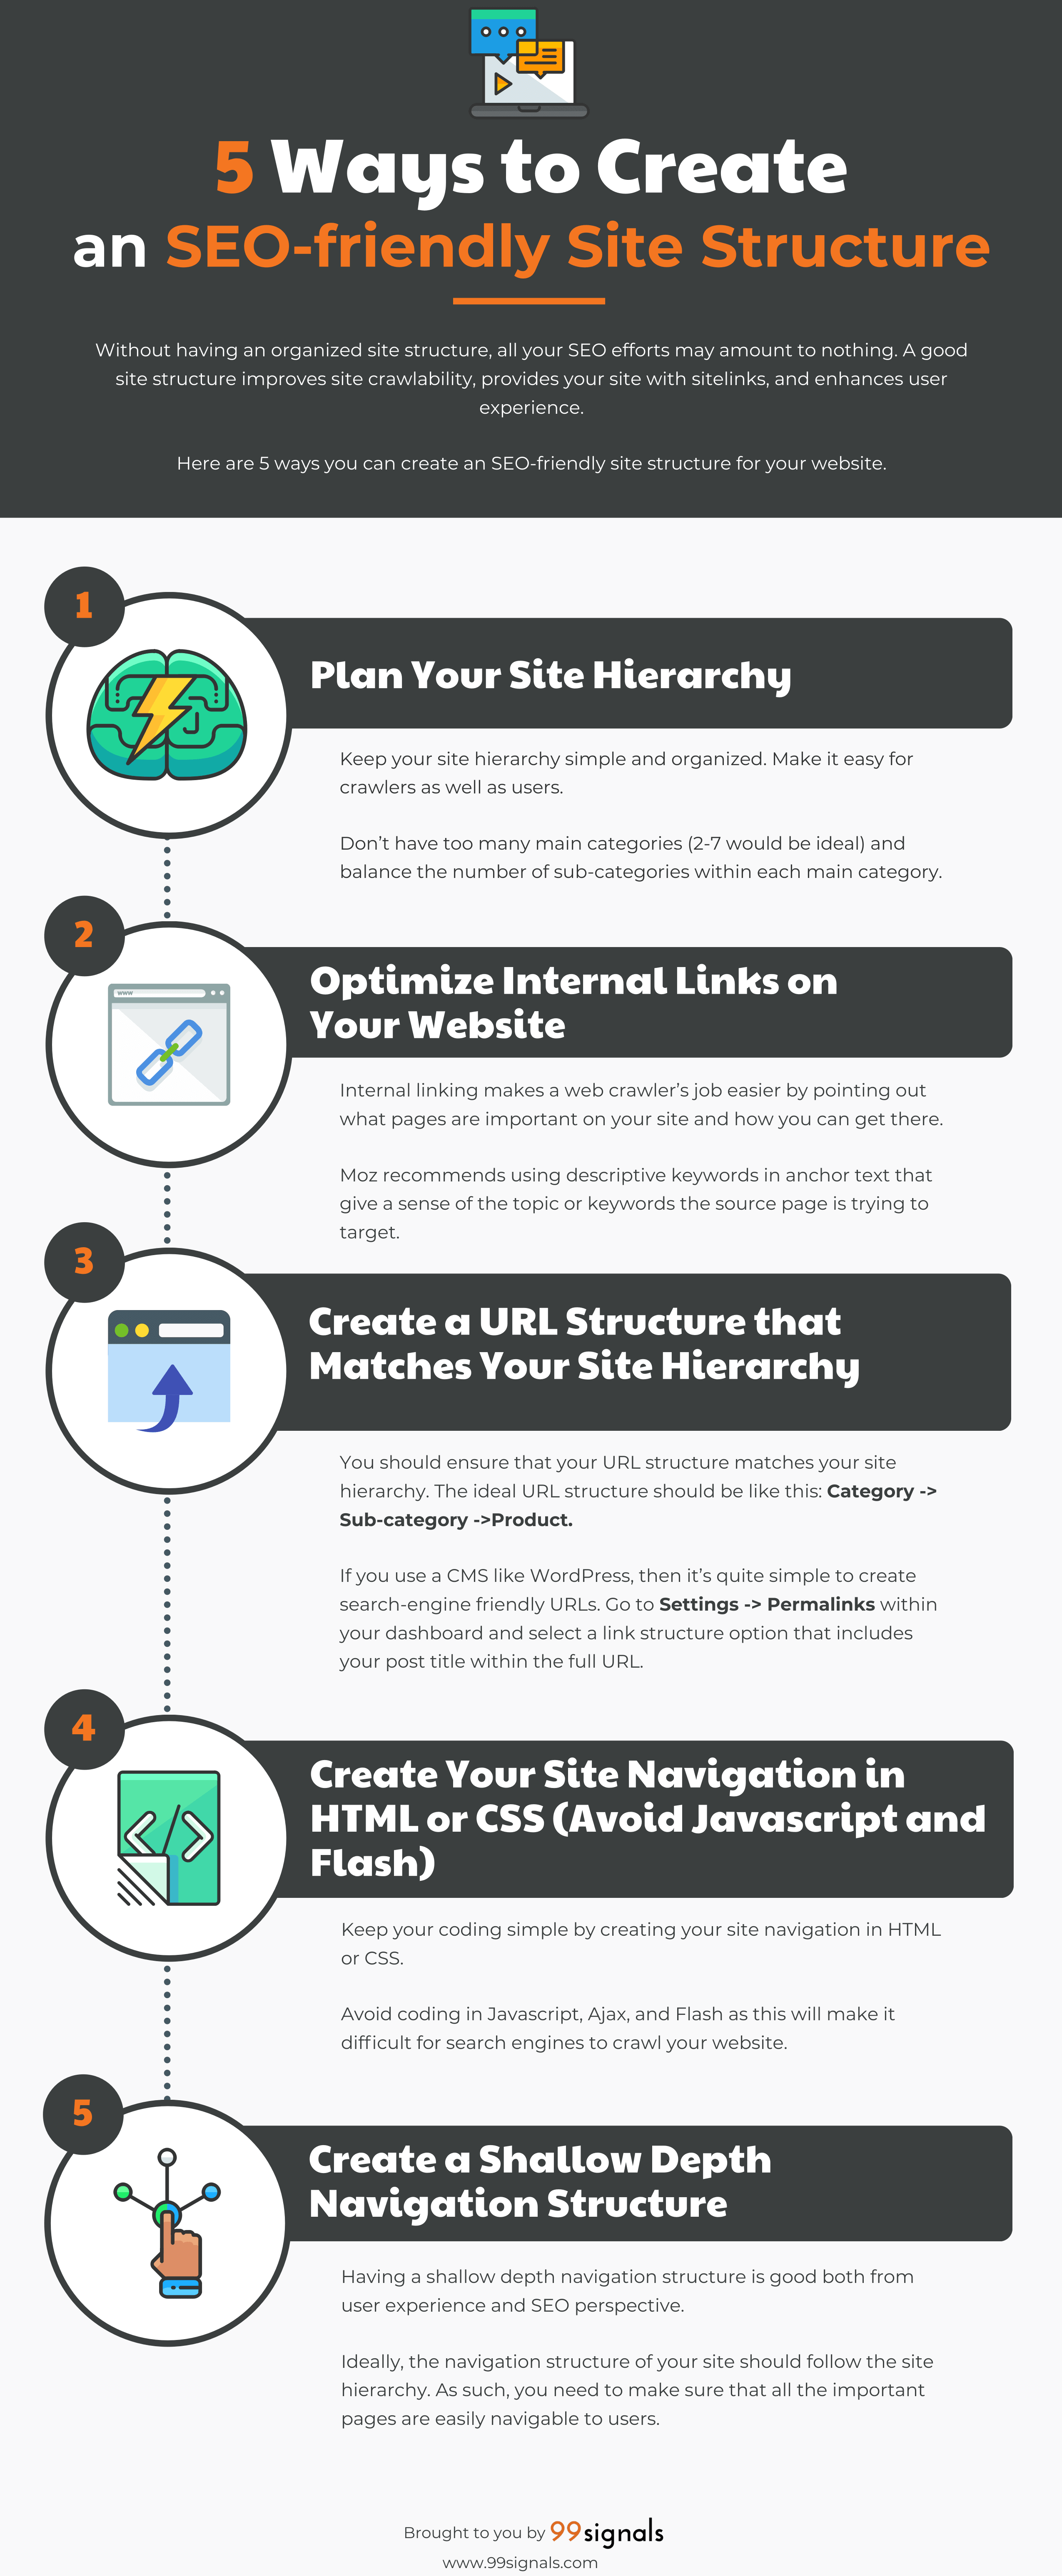 How to Create an SEO-friendly Site Structure (Infographic)